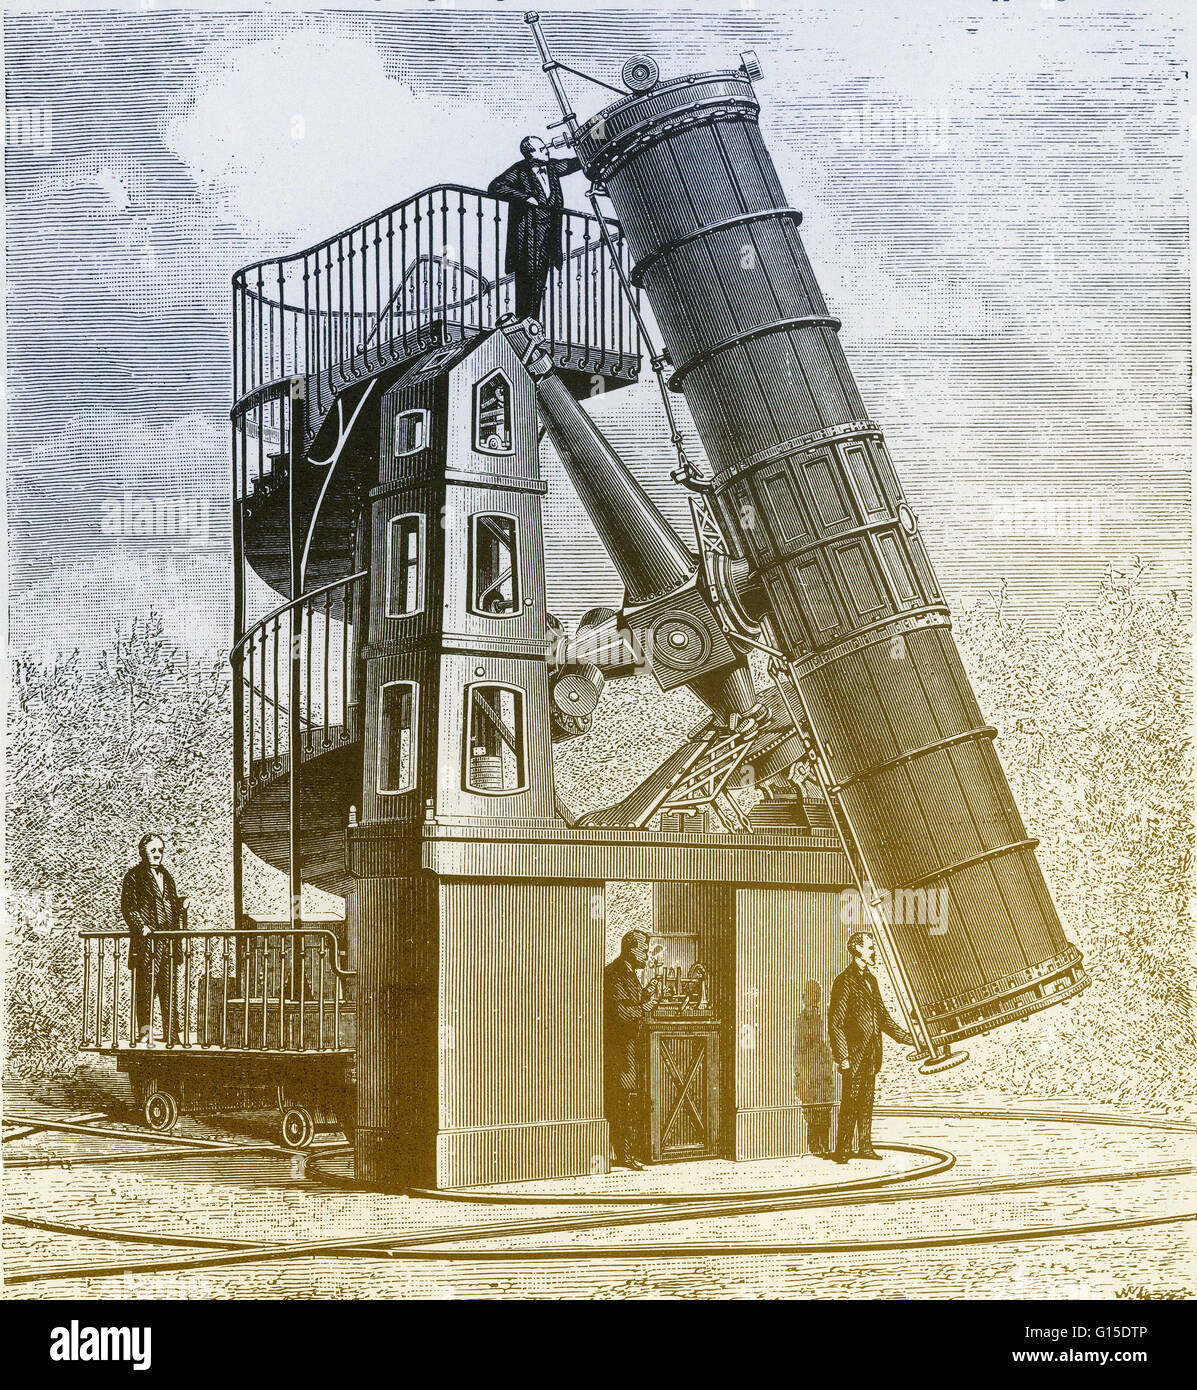 Paris telescope. Newtonian reflecting telescope installed at the Paris Observatory, France, during the 1860s. It had a 1.2 meter (48 inch) diameter mirror. This was the first large telescope mirror to be made of glass coated with silver deposited chemical Stock Photo